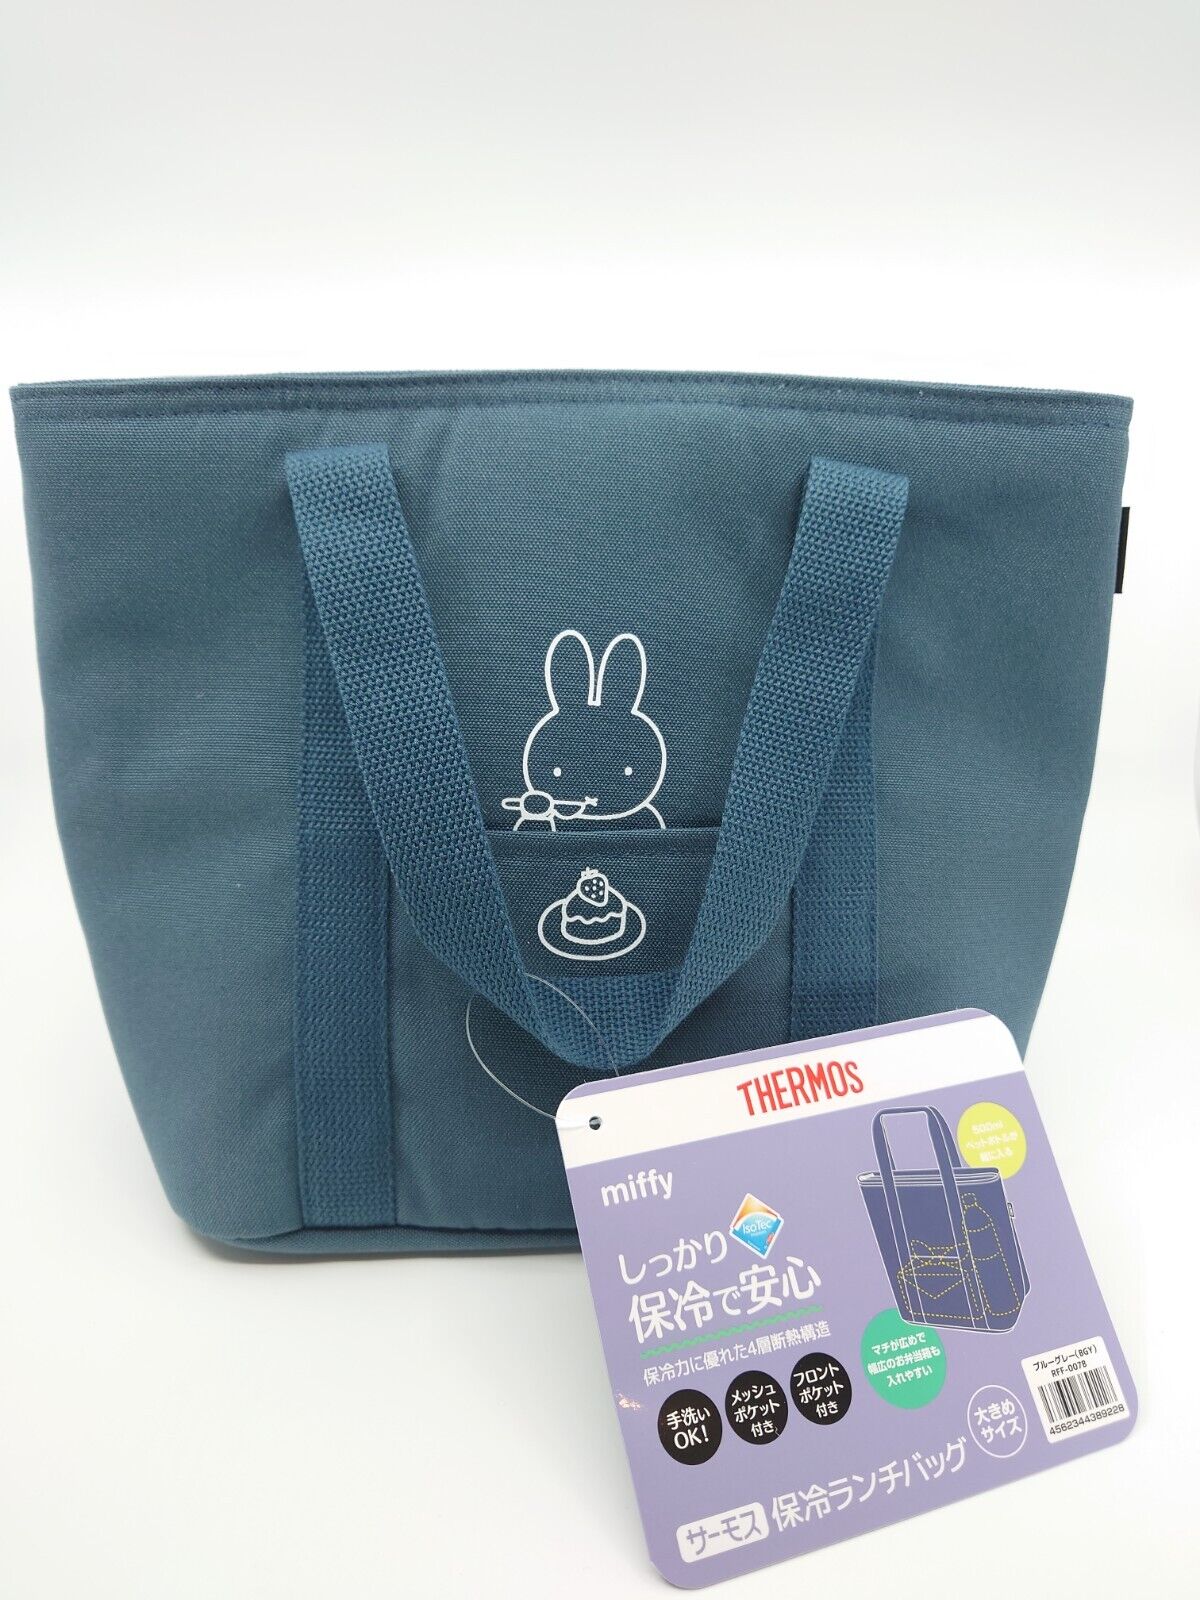 Miffy Rabbit Thermos Cold Insulation Bento L Lunch Tote bag light blue School